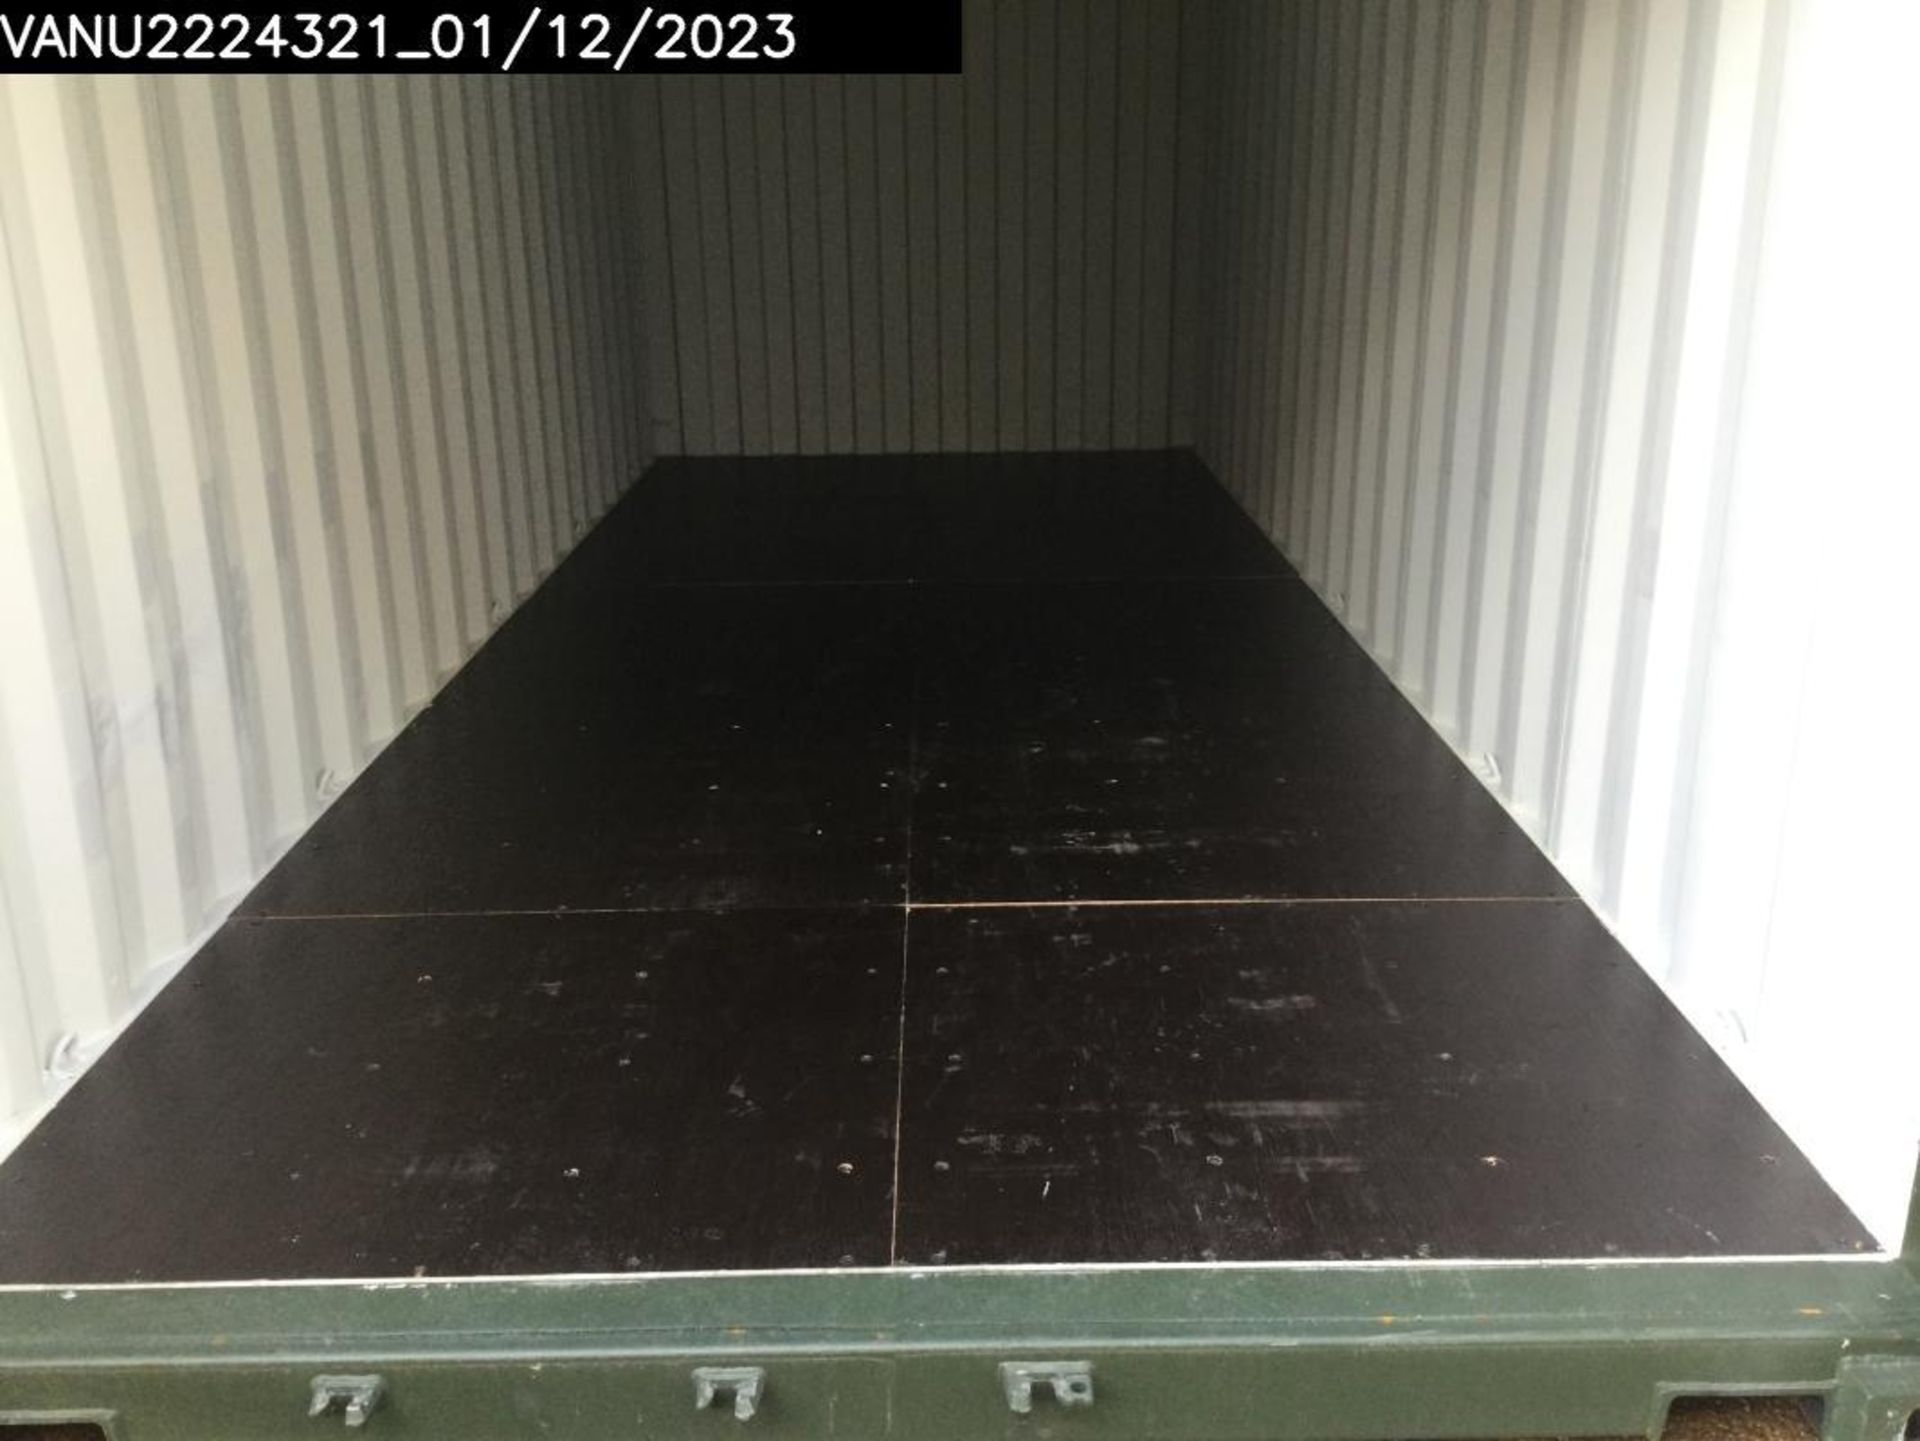 One Trip 20ft Shipping Container - Unit Number – VANU2224321 - Bild 7 aus 7